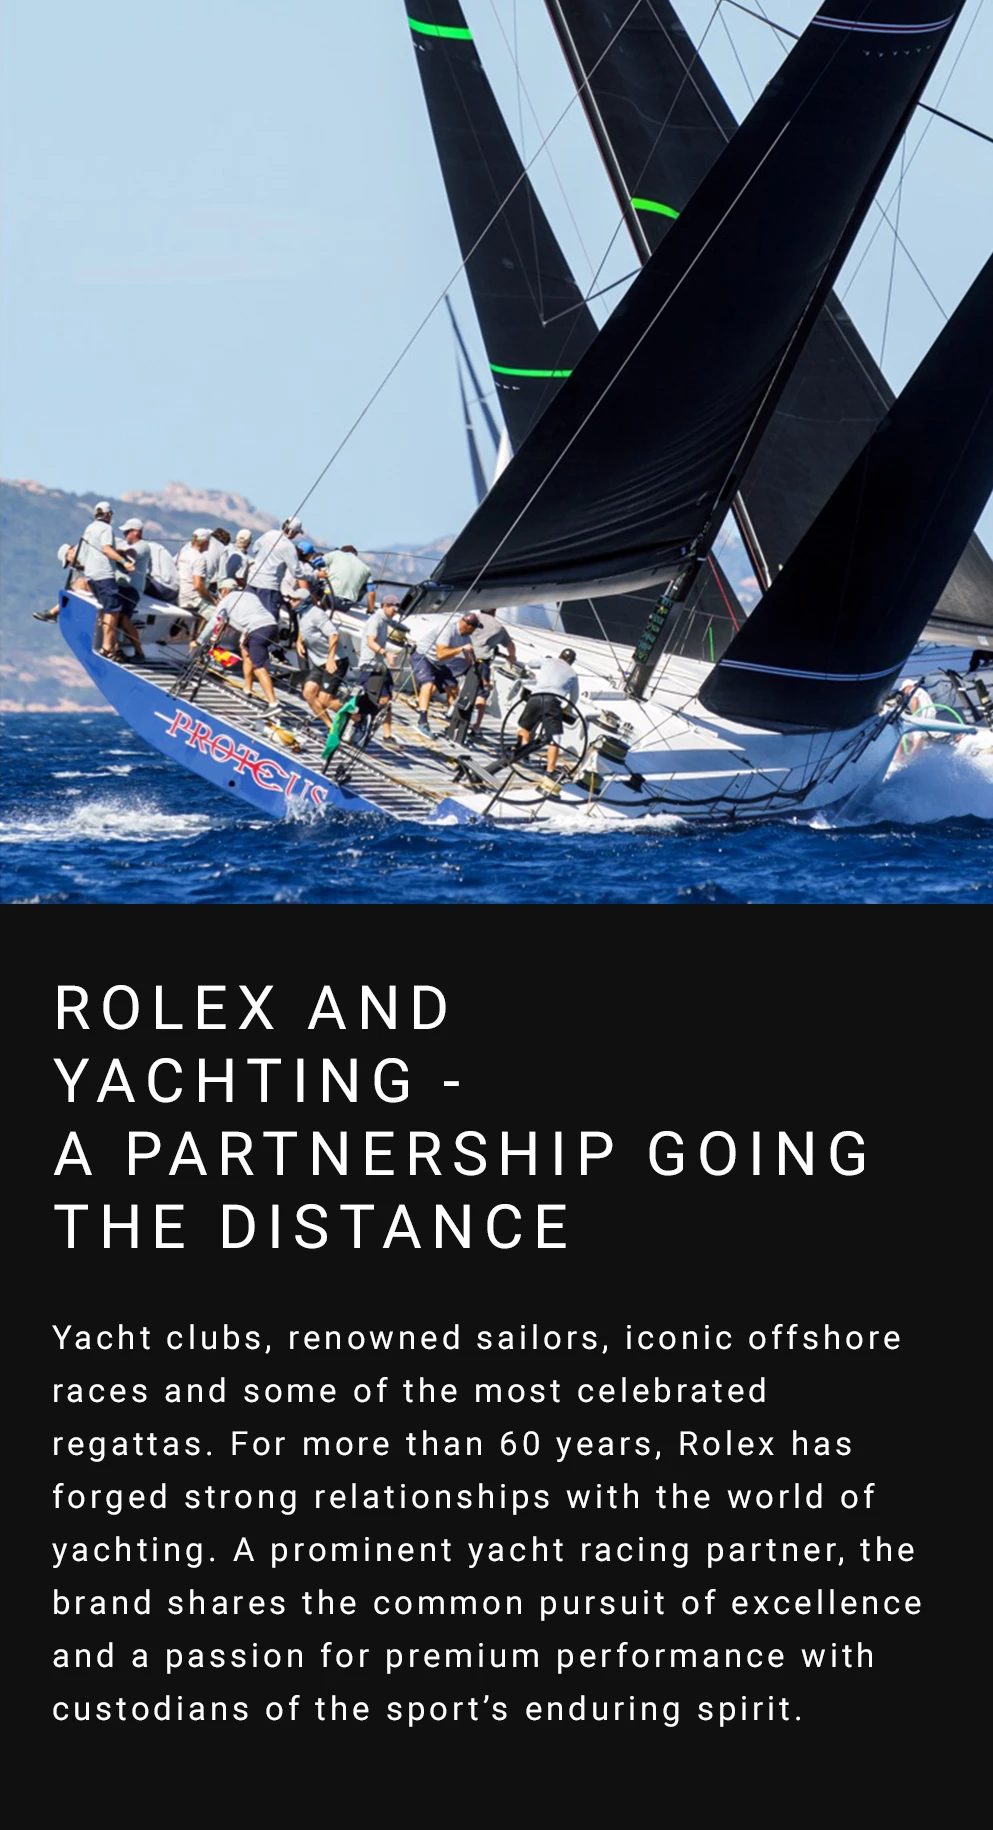 Rolex and Yachting